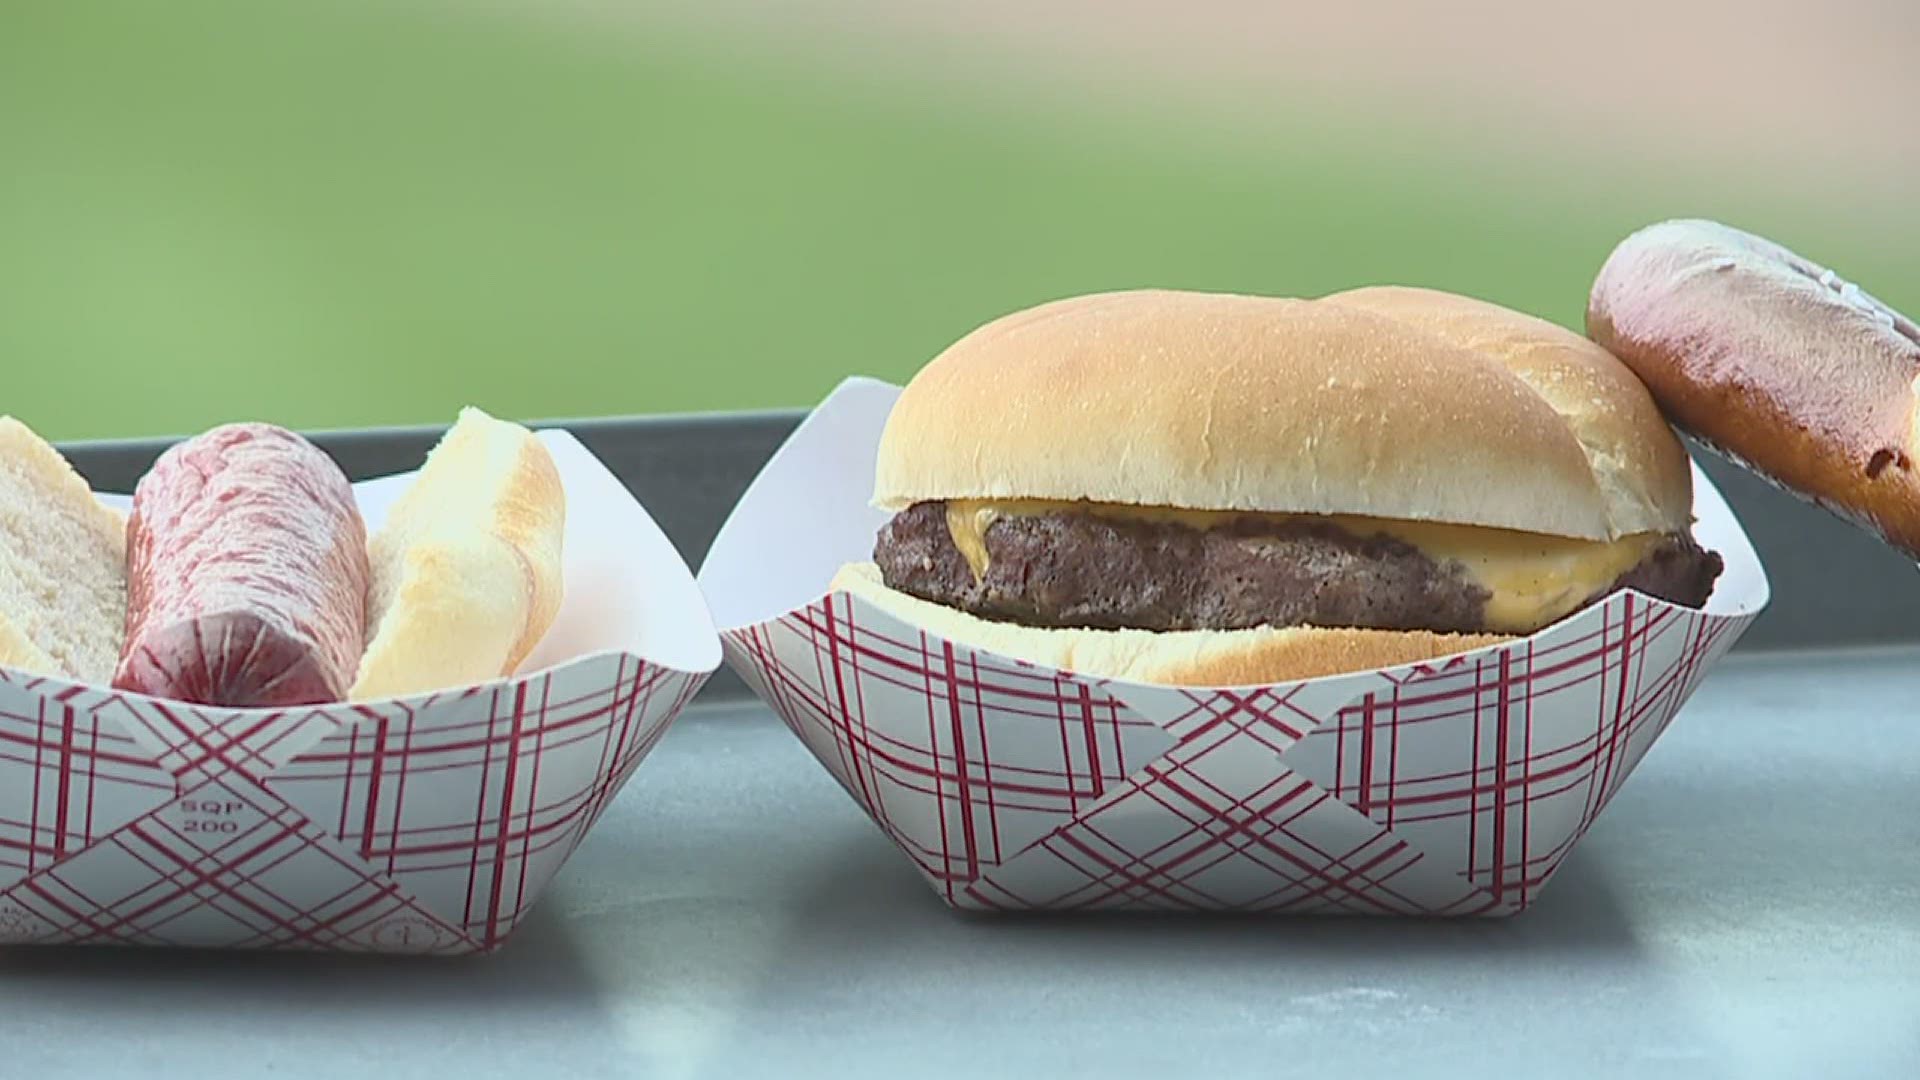 Danny Franklyn showed us some of the traditional favorites you can enjoy at the ballpark, but he also told us the specials you can get throughout the week.